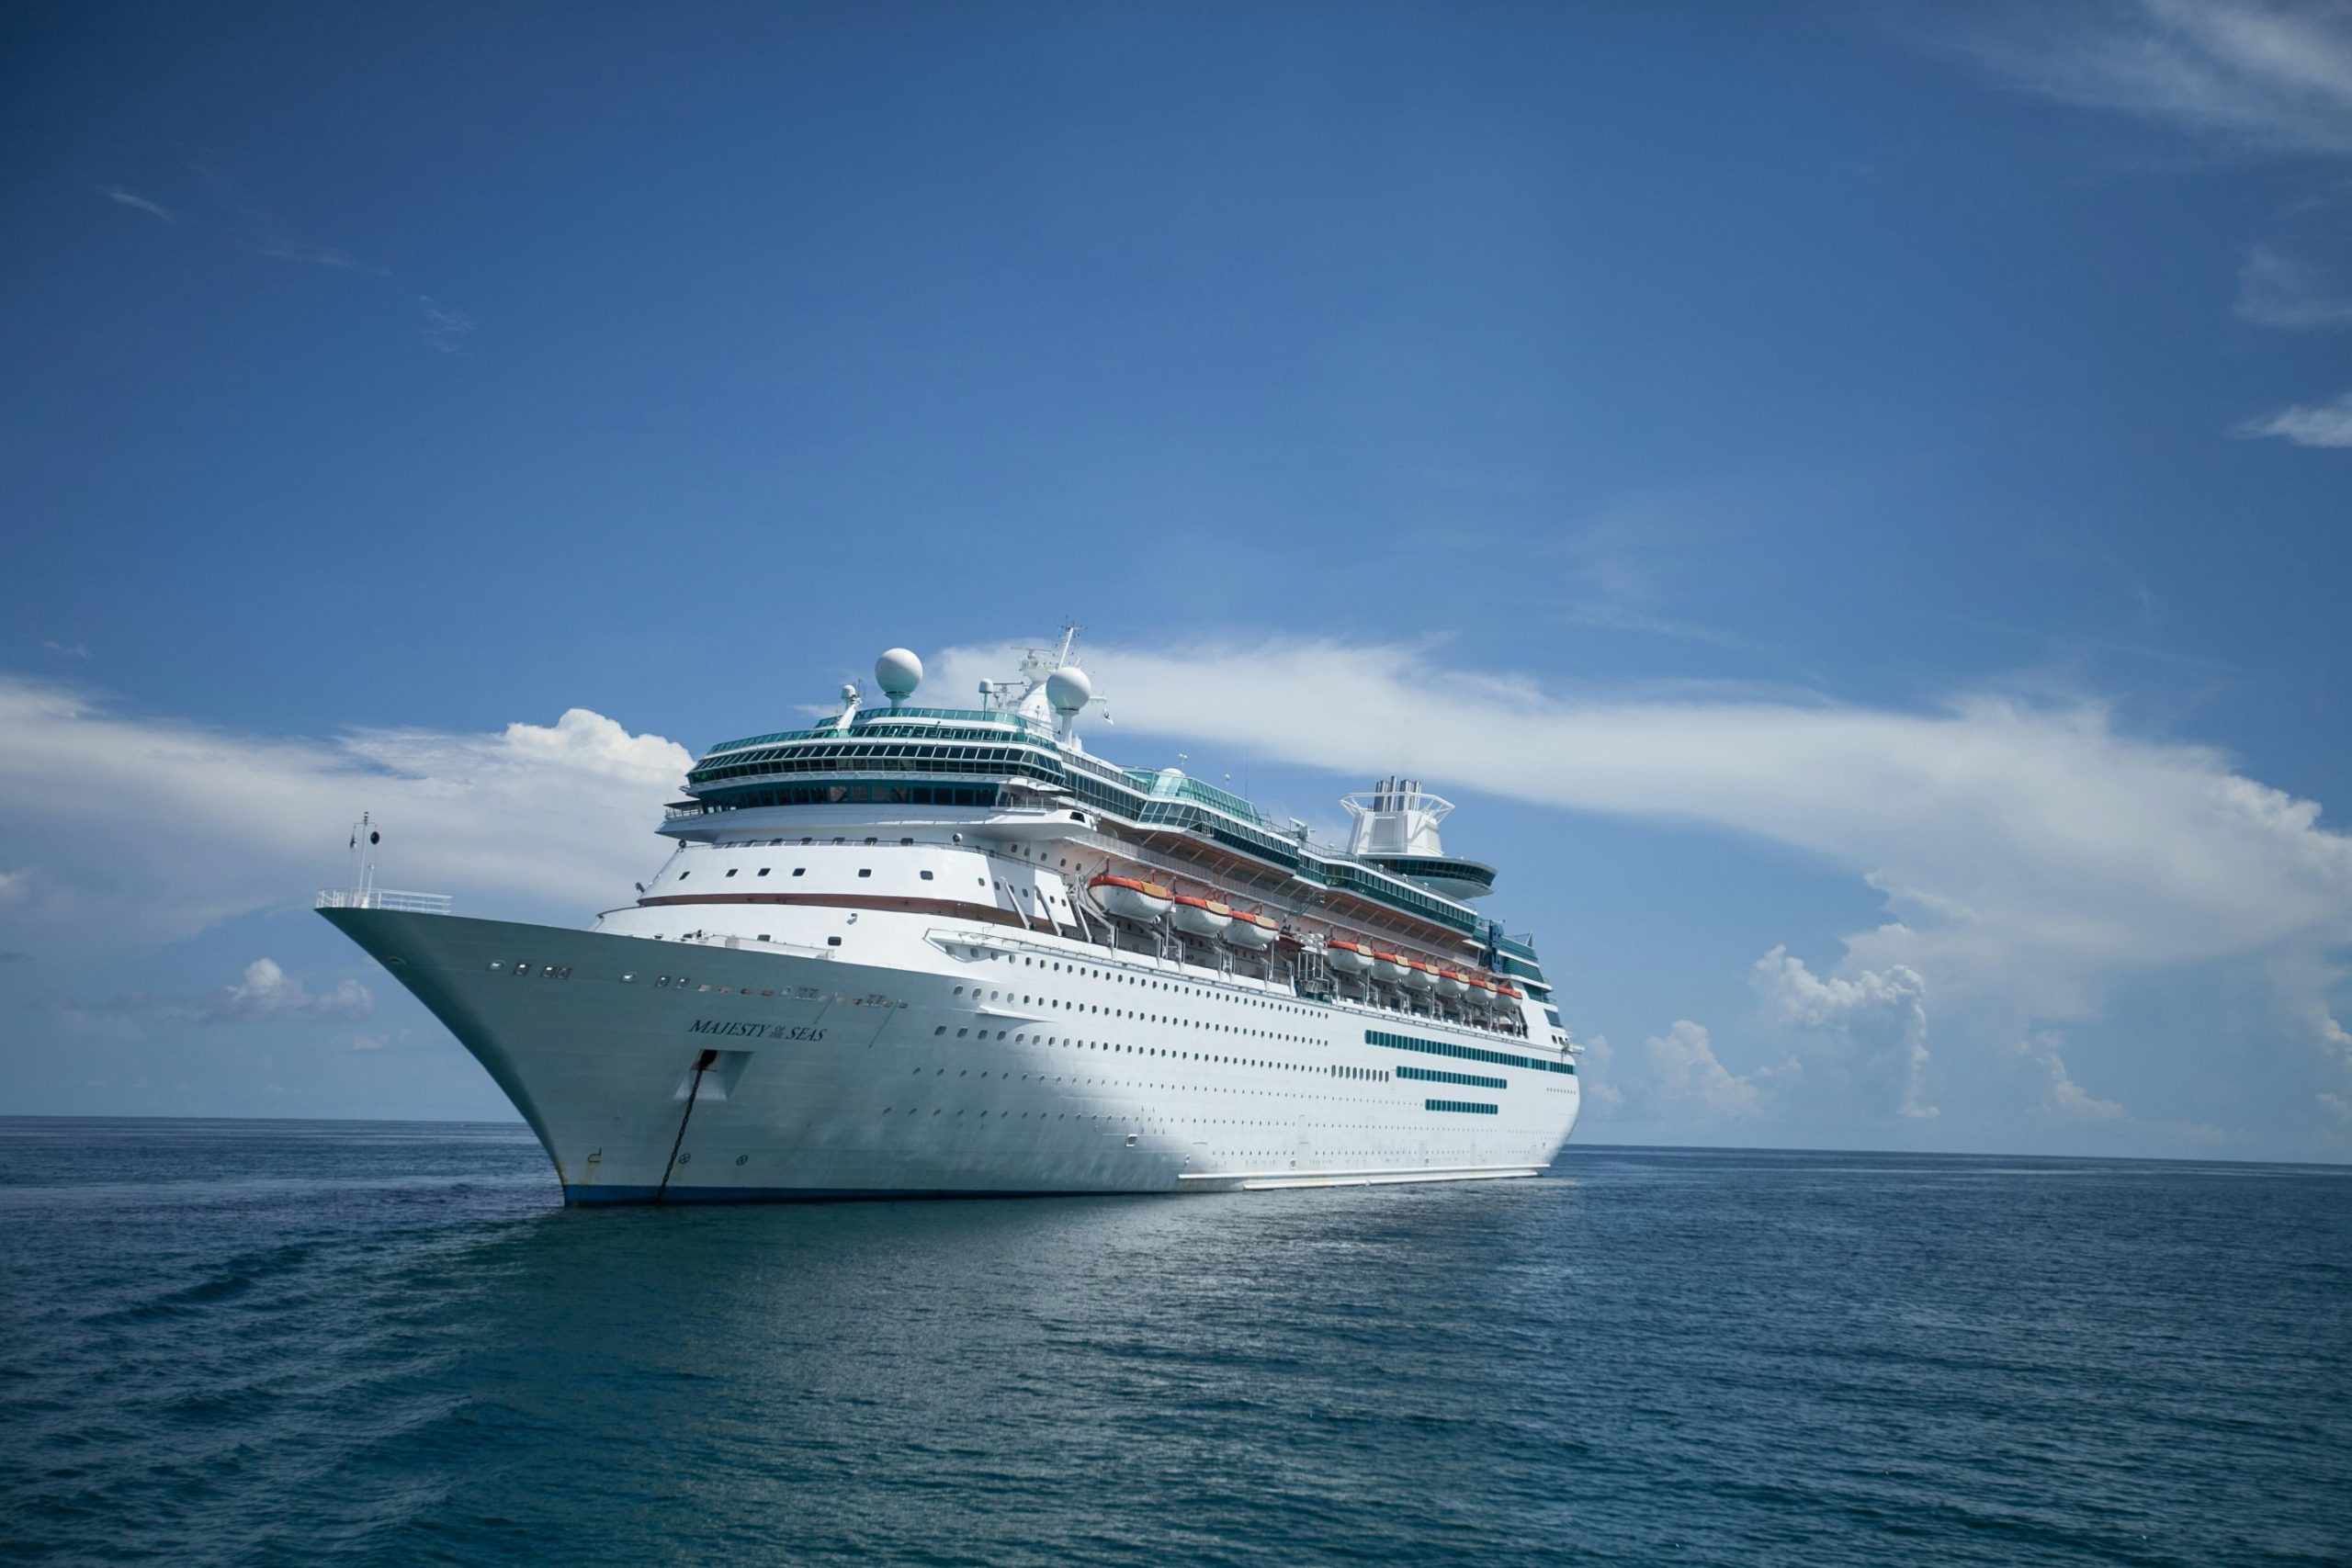 explore the world by sea with an unforgettable cruise experience. discover breathtaking views, luxury amenities, and exciting activities on a cruise vacation.